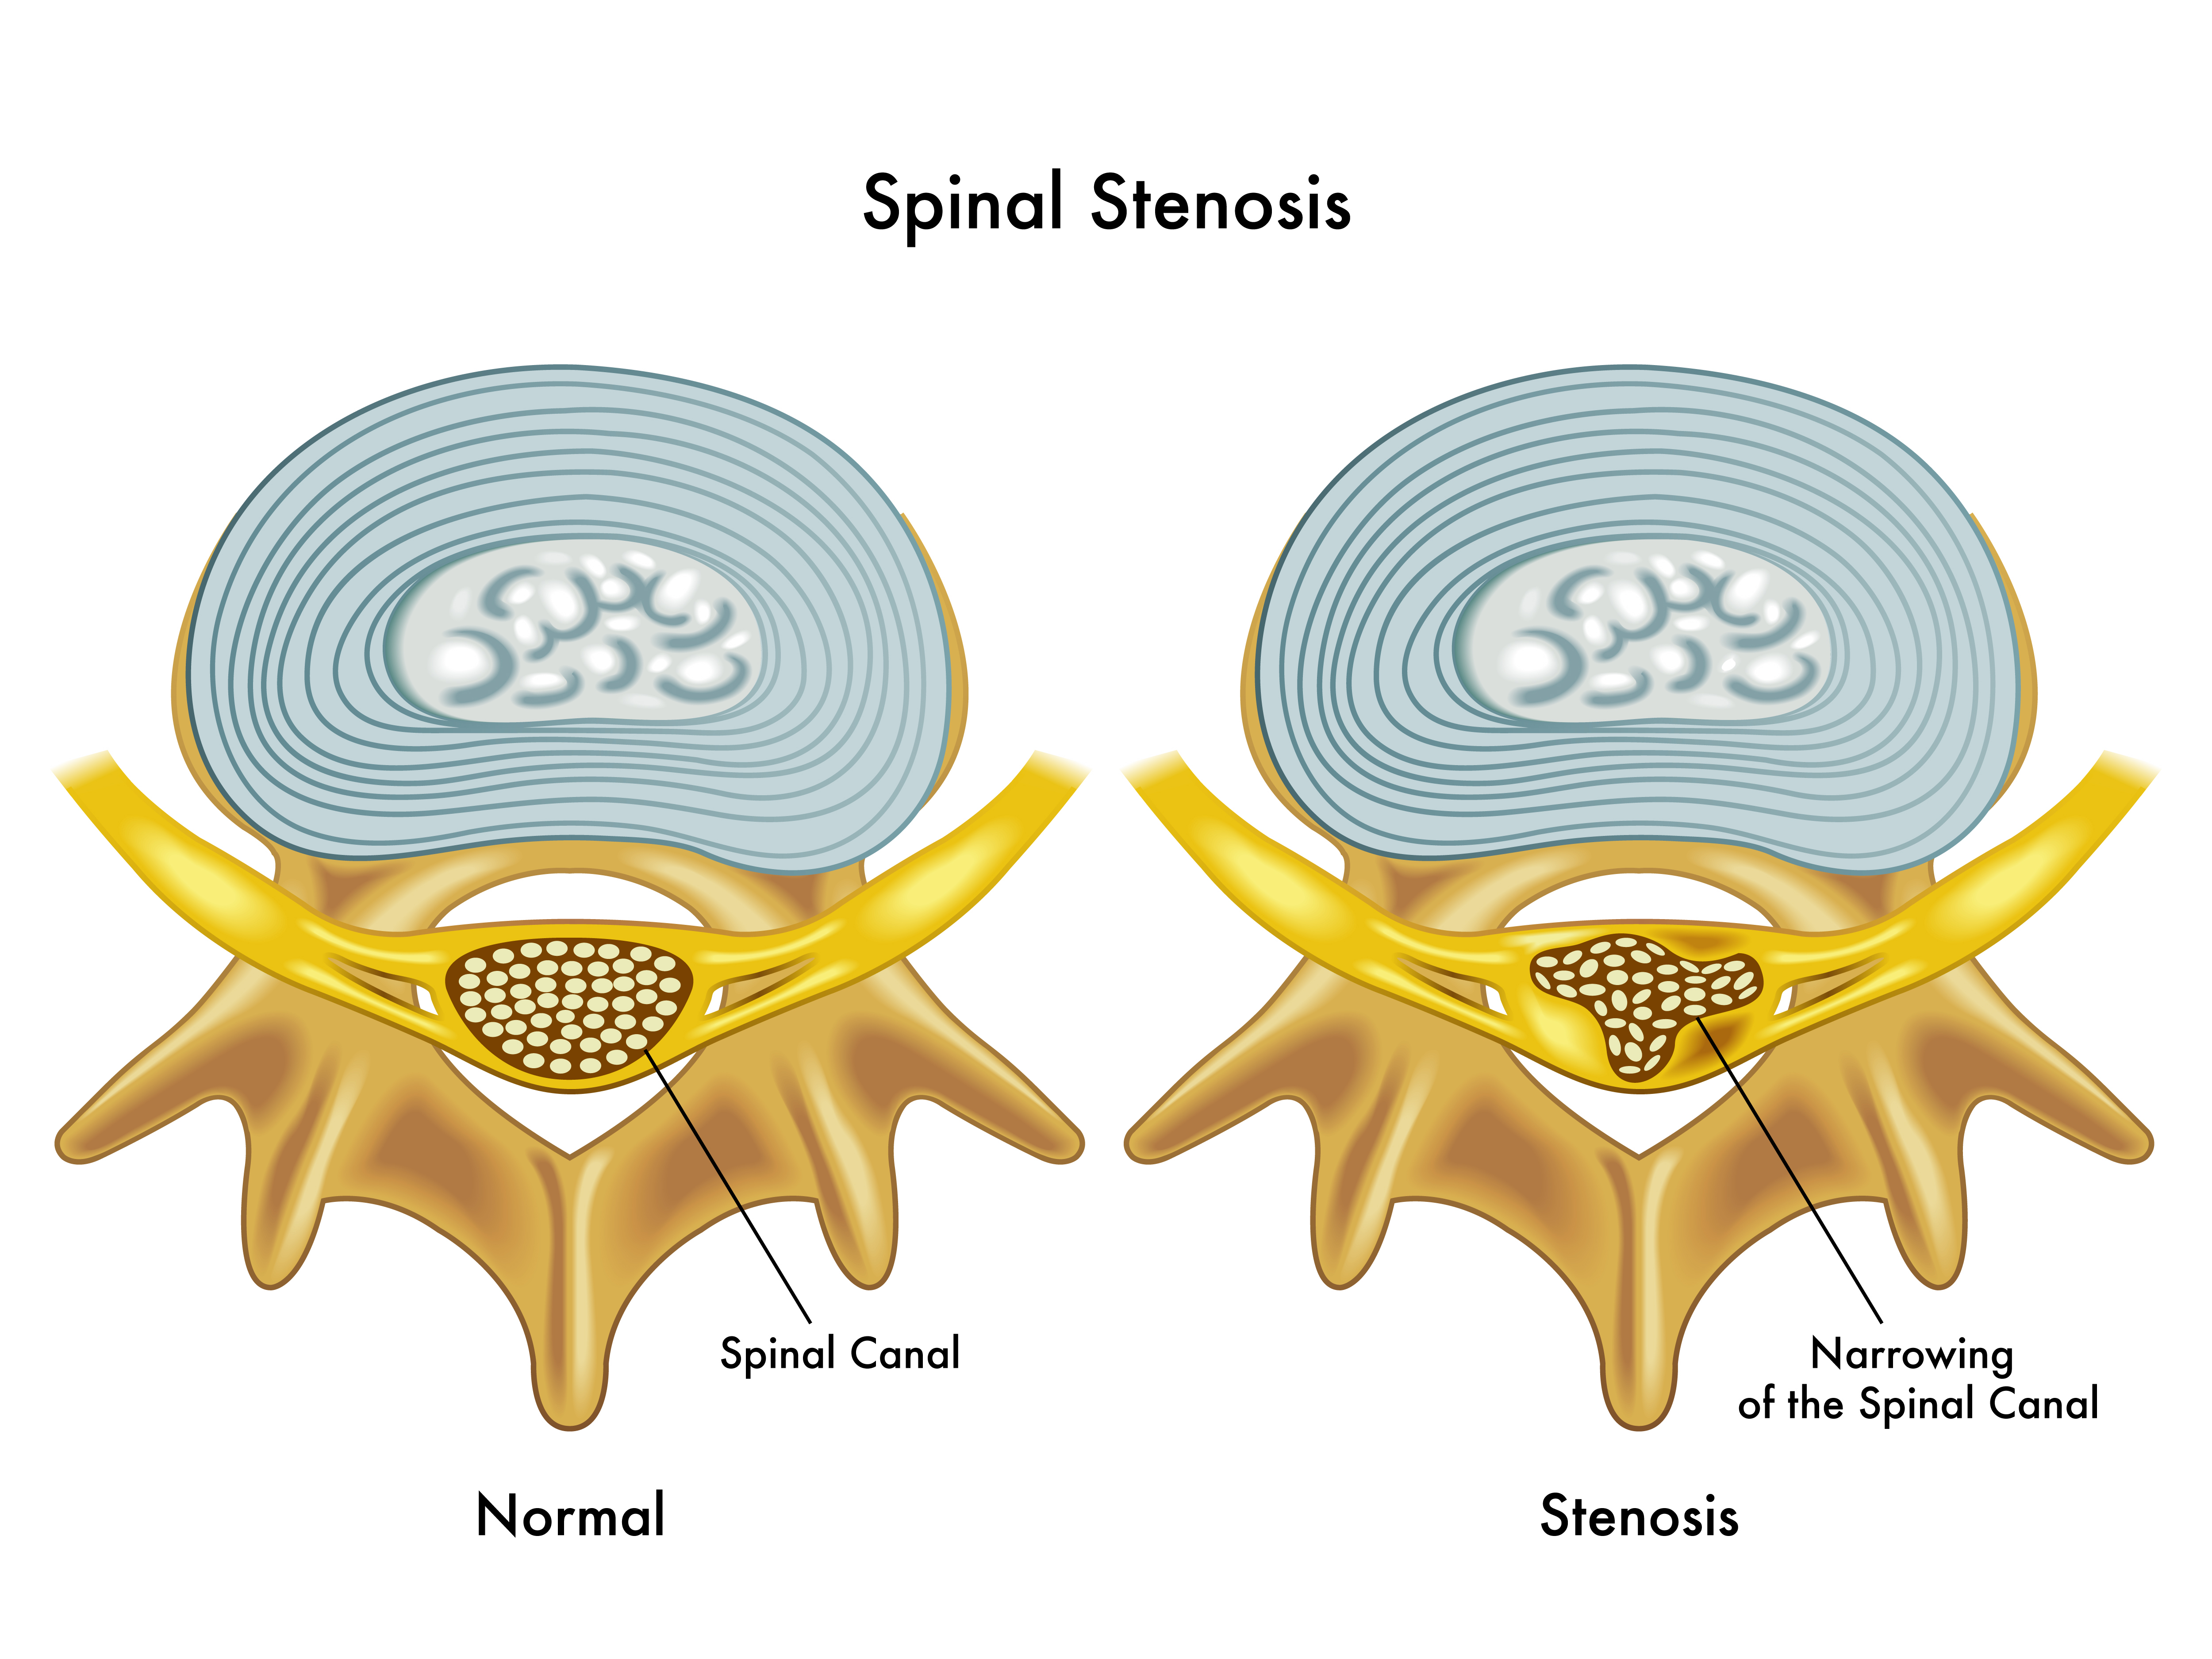 What worsens spinal stenosis?